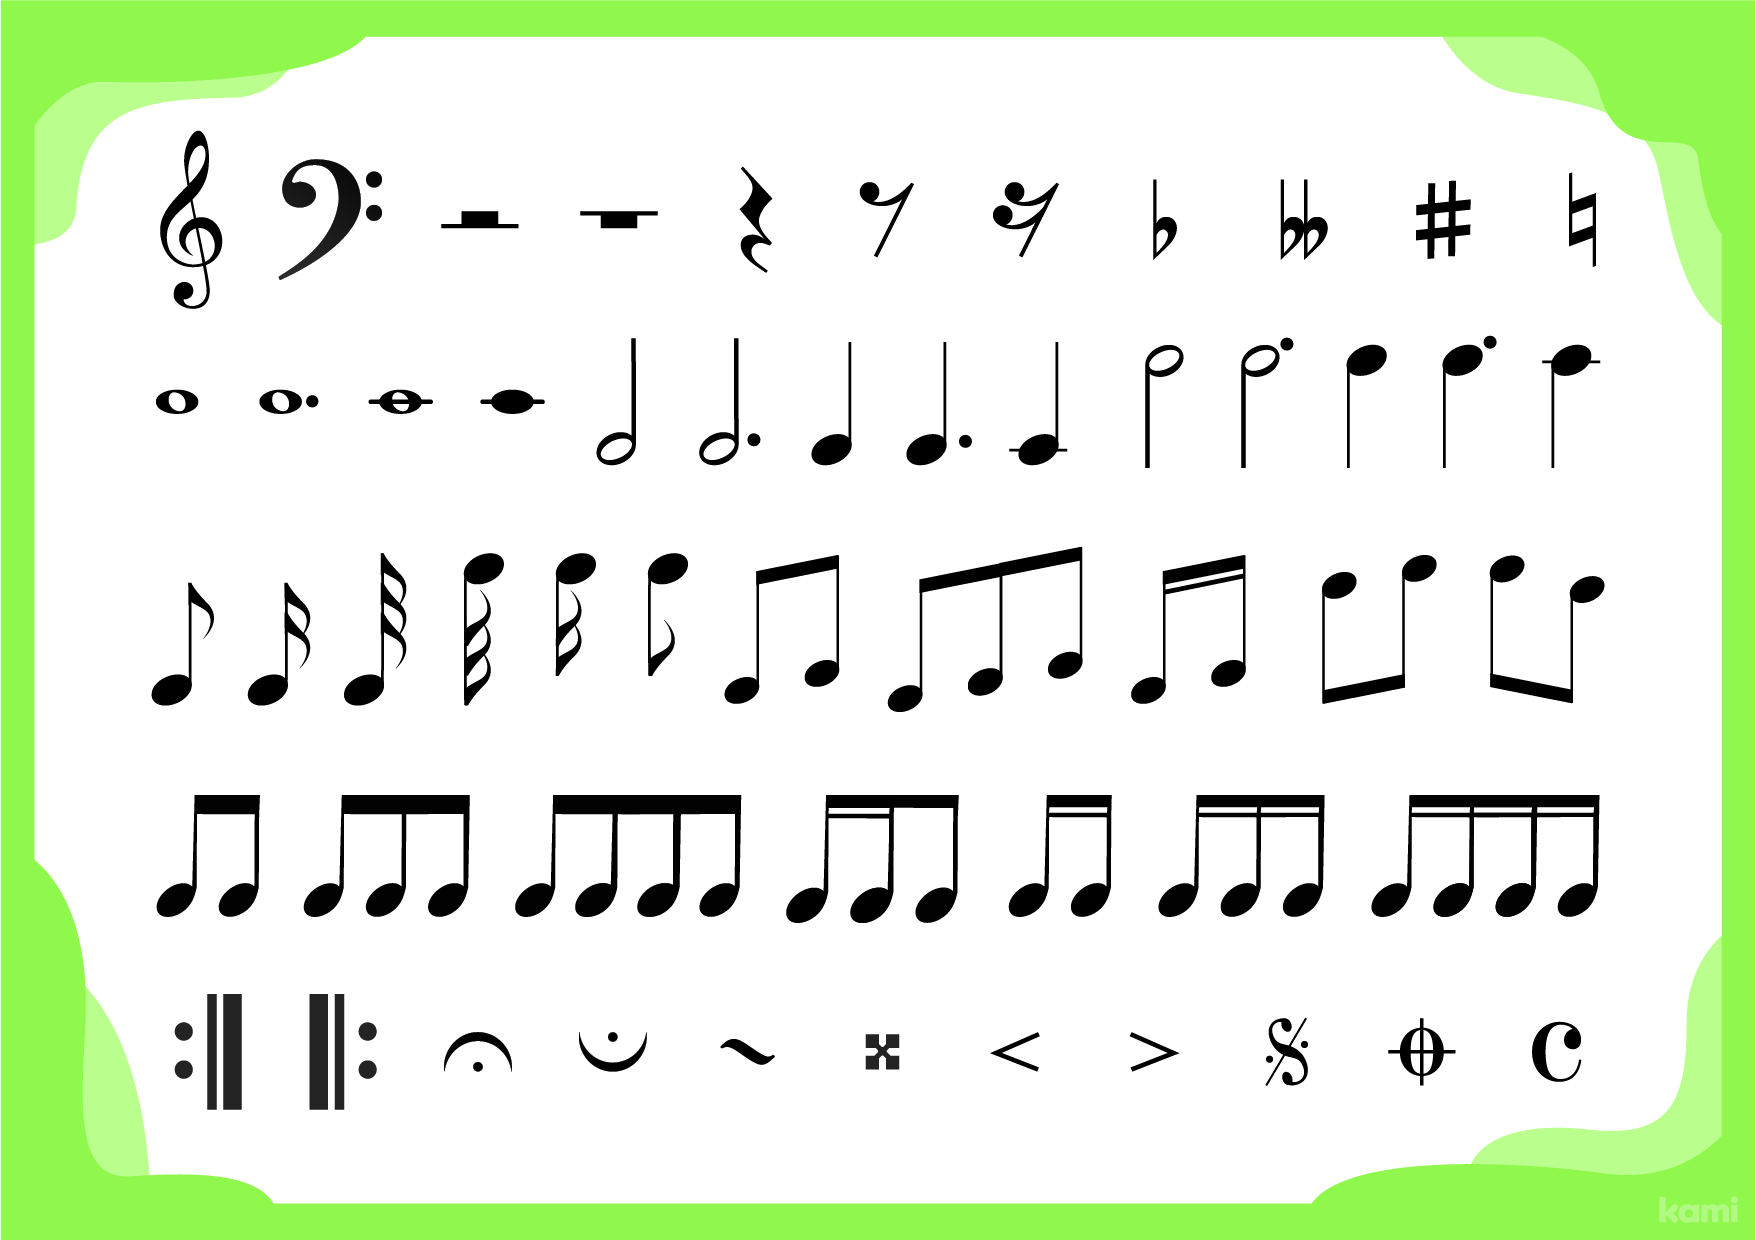 A music notes template for learning and writing music with a interactive design.